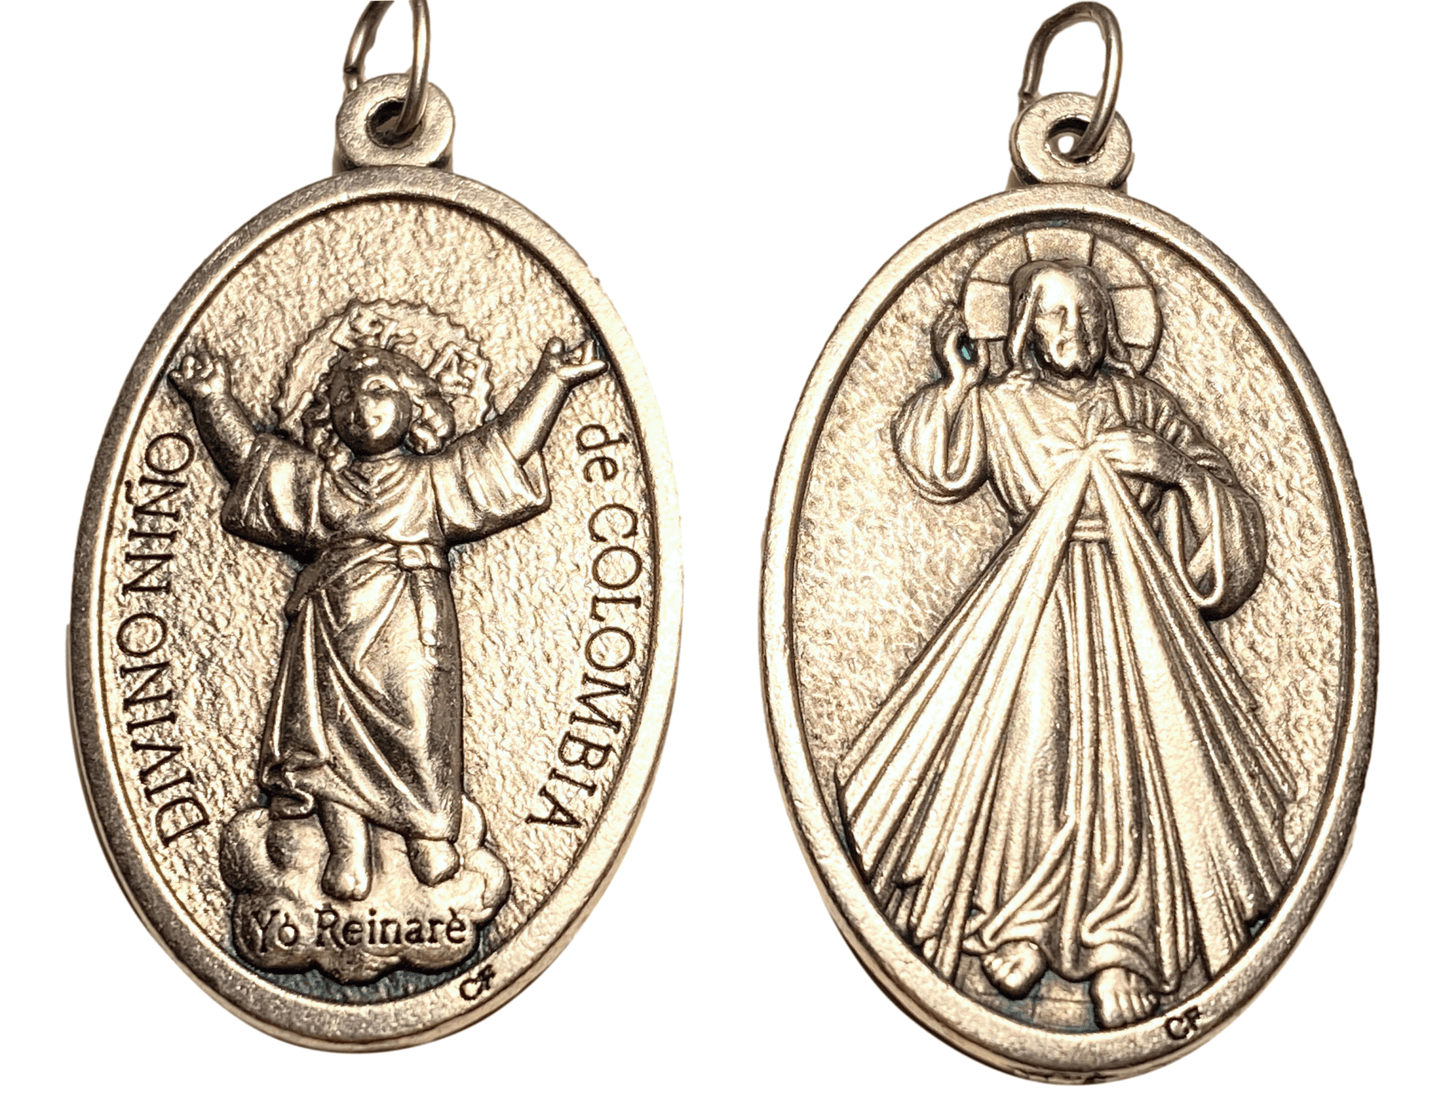 Medal Divine Mercy Santo Nino de Colombia Italian Double-Sided Silver Oxidized Metal Alloy 1 3/4 L x 1 W Inches - Ysleta Mission Gift Shop- VOTED El Paso's Best Gift Shop